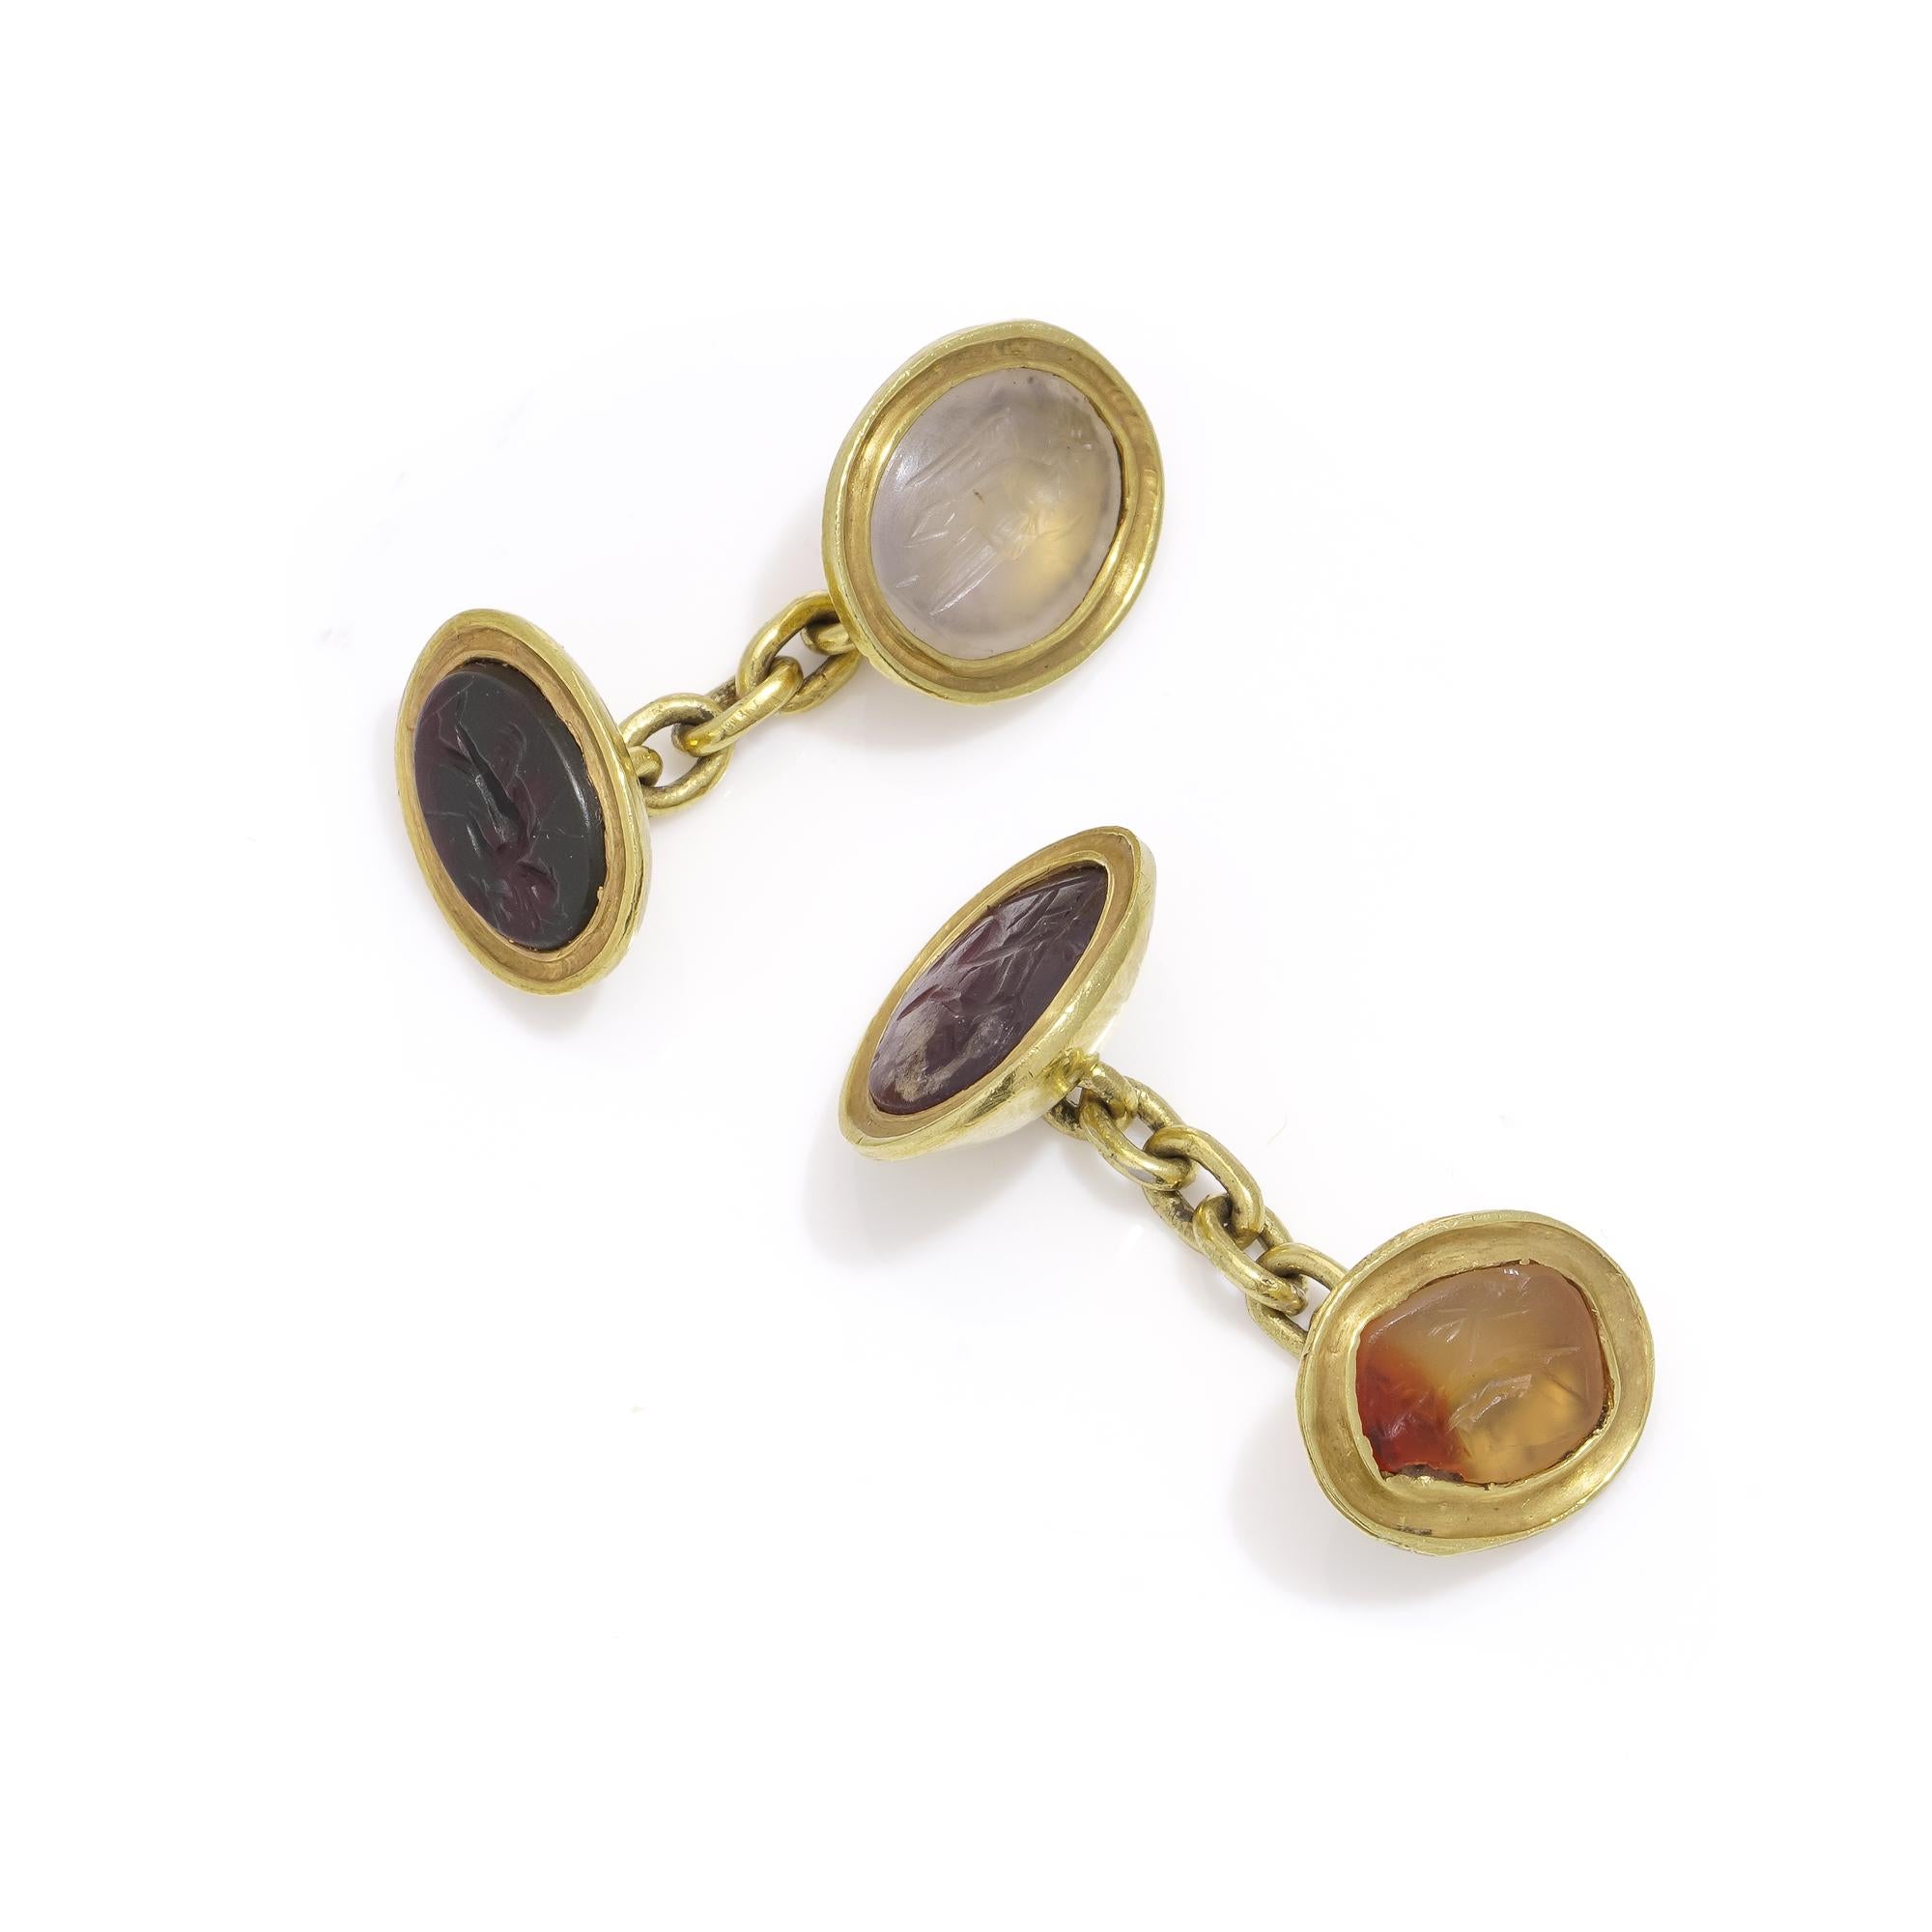 Antique 22kt yellow gold cufflinks, each adorned with Roman 4 carved hardstone For Sale 2